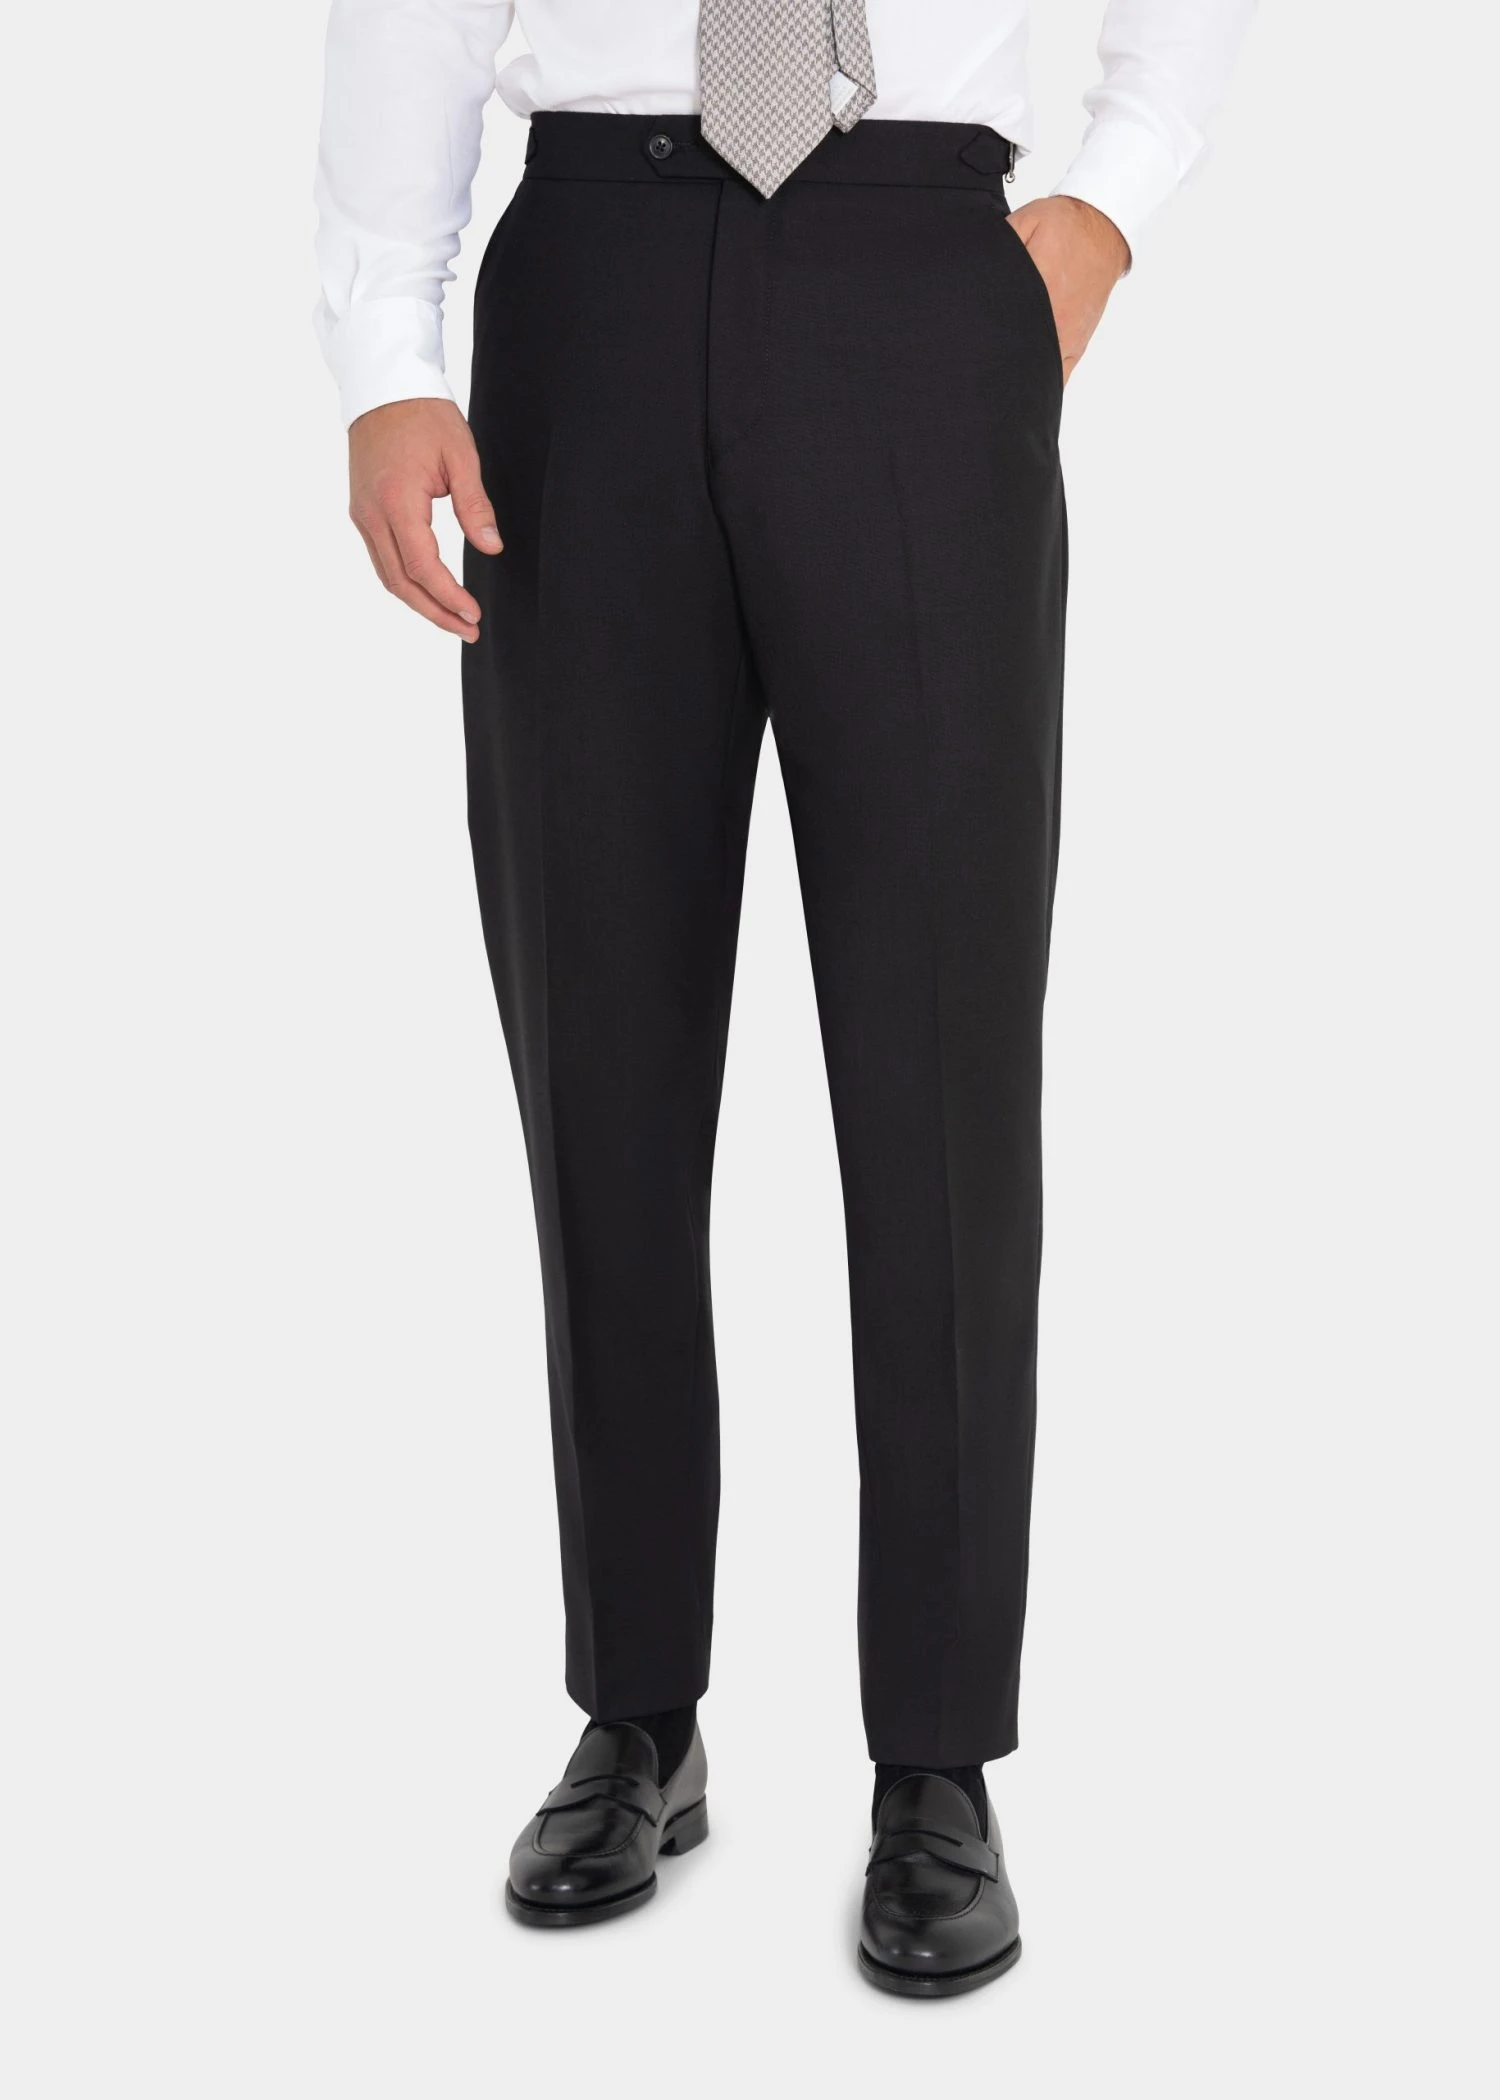 black suit trousers in twistair fabric